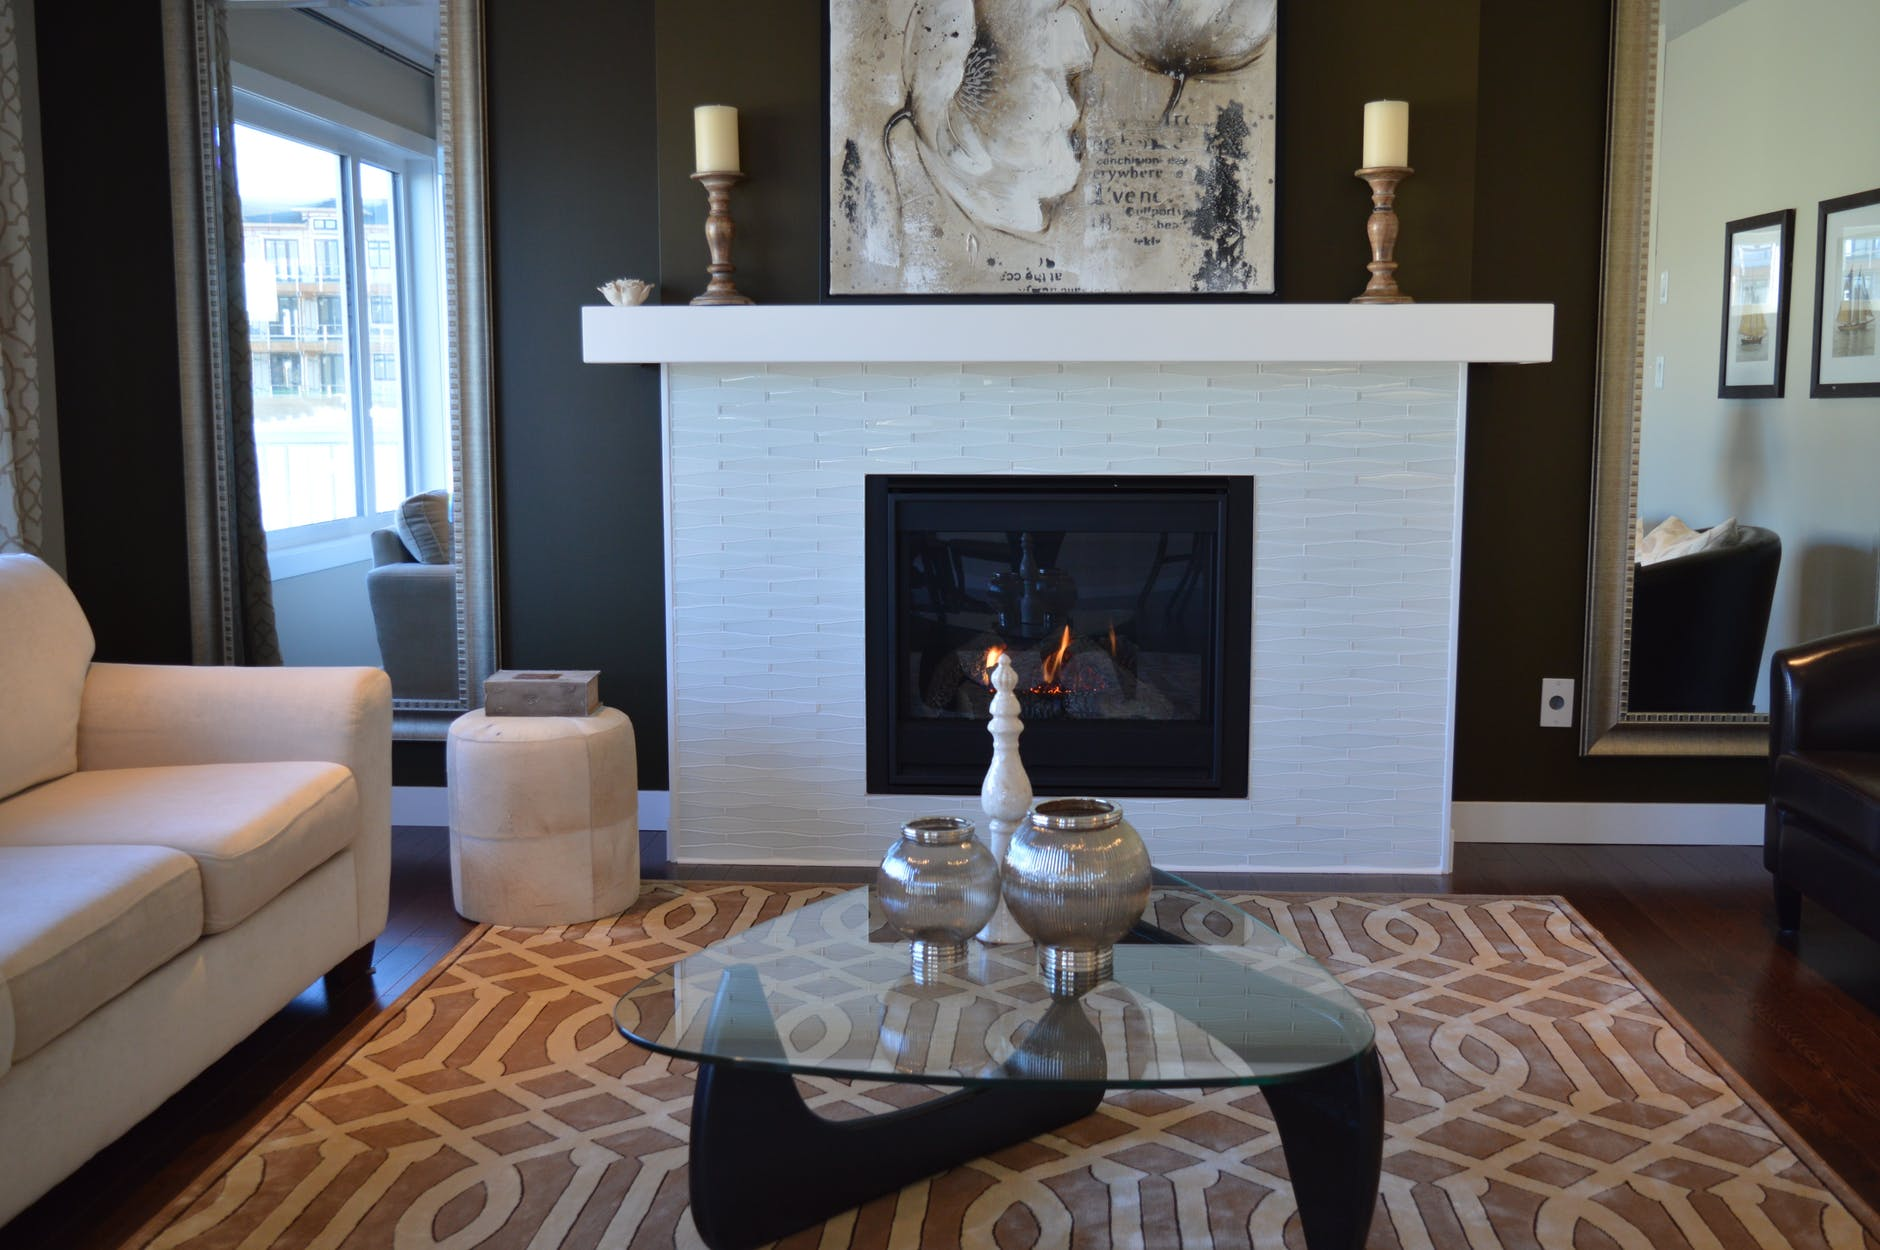 Why Modern Electric Fireplaces Are More than Just Good Looks